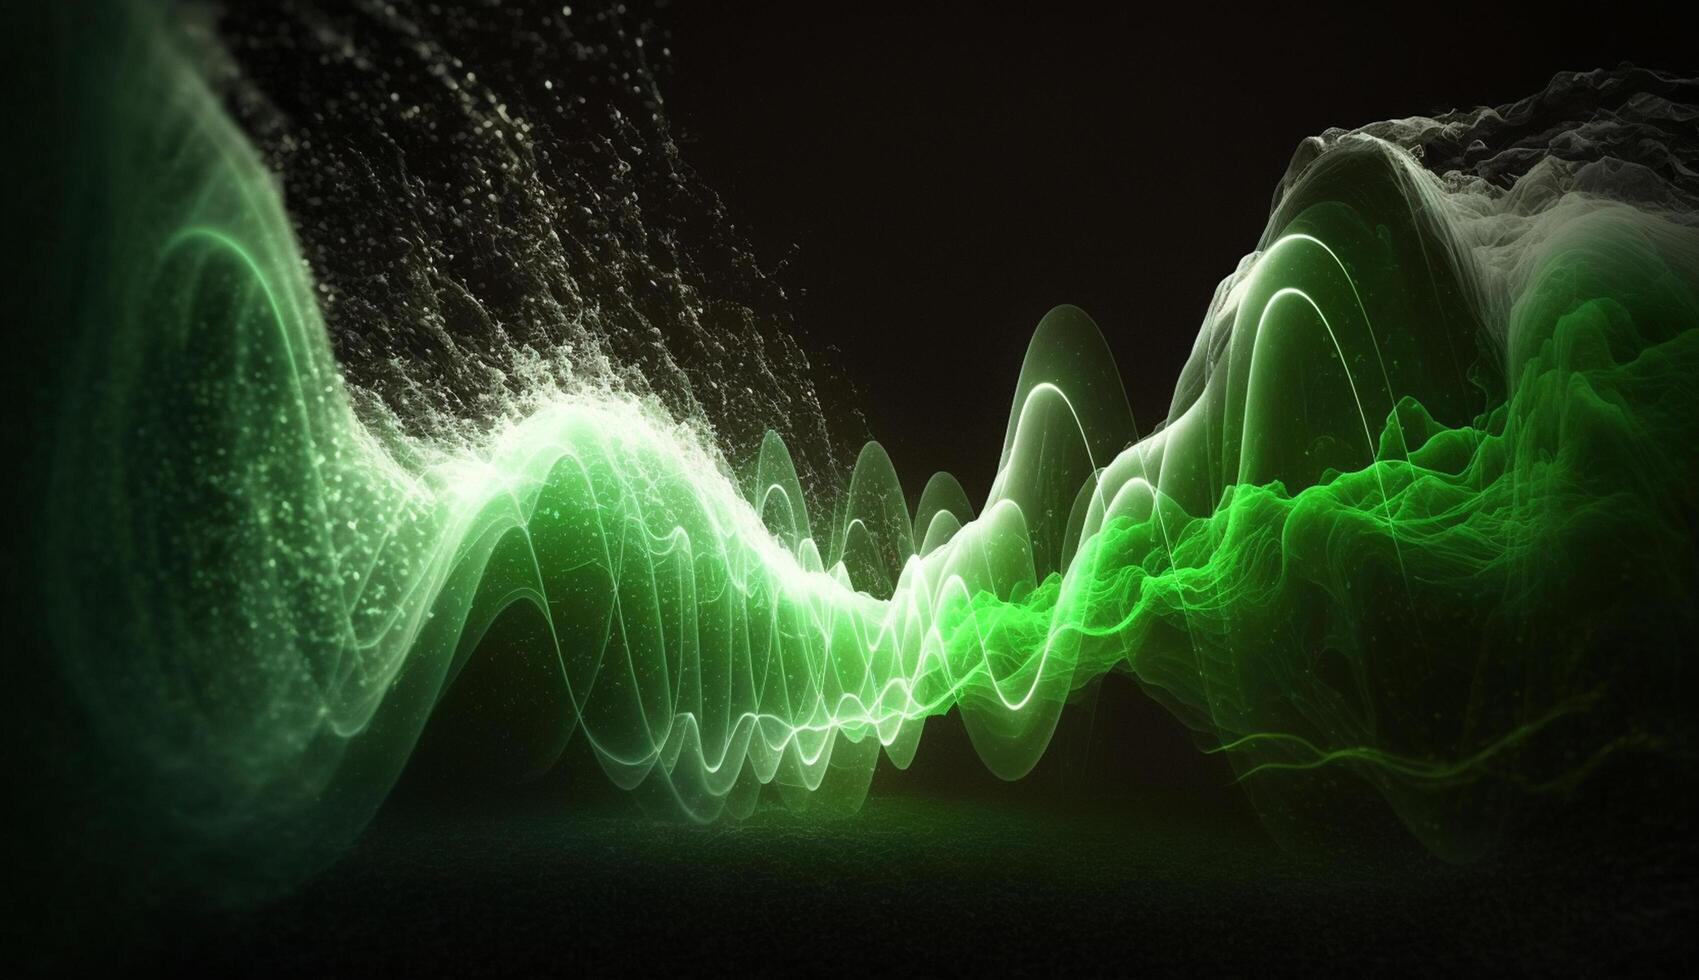 Green Frequency Waves on Dark Background, Abstract Artwork photo